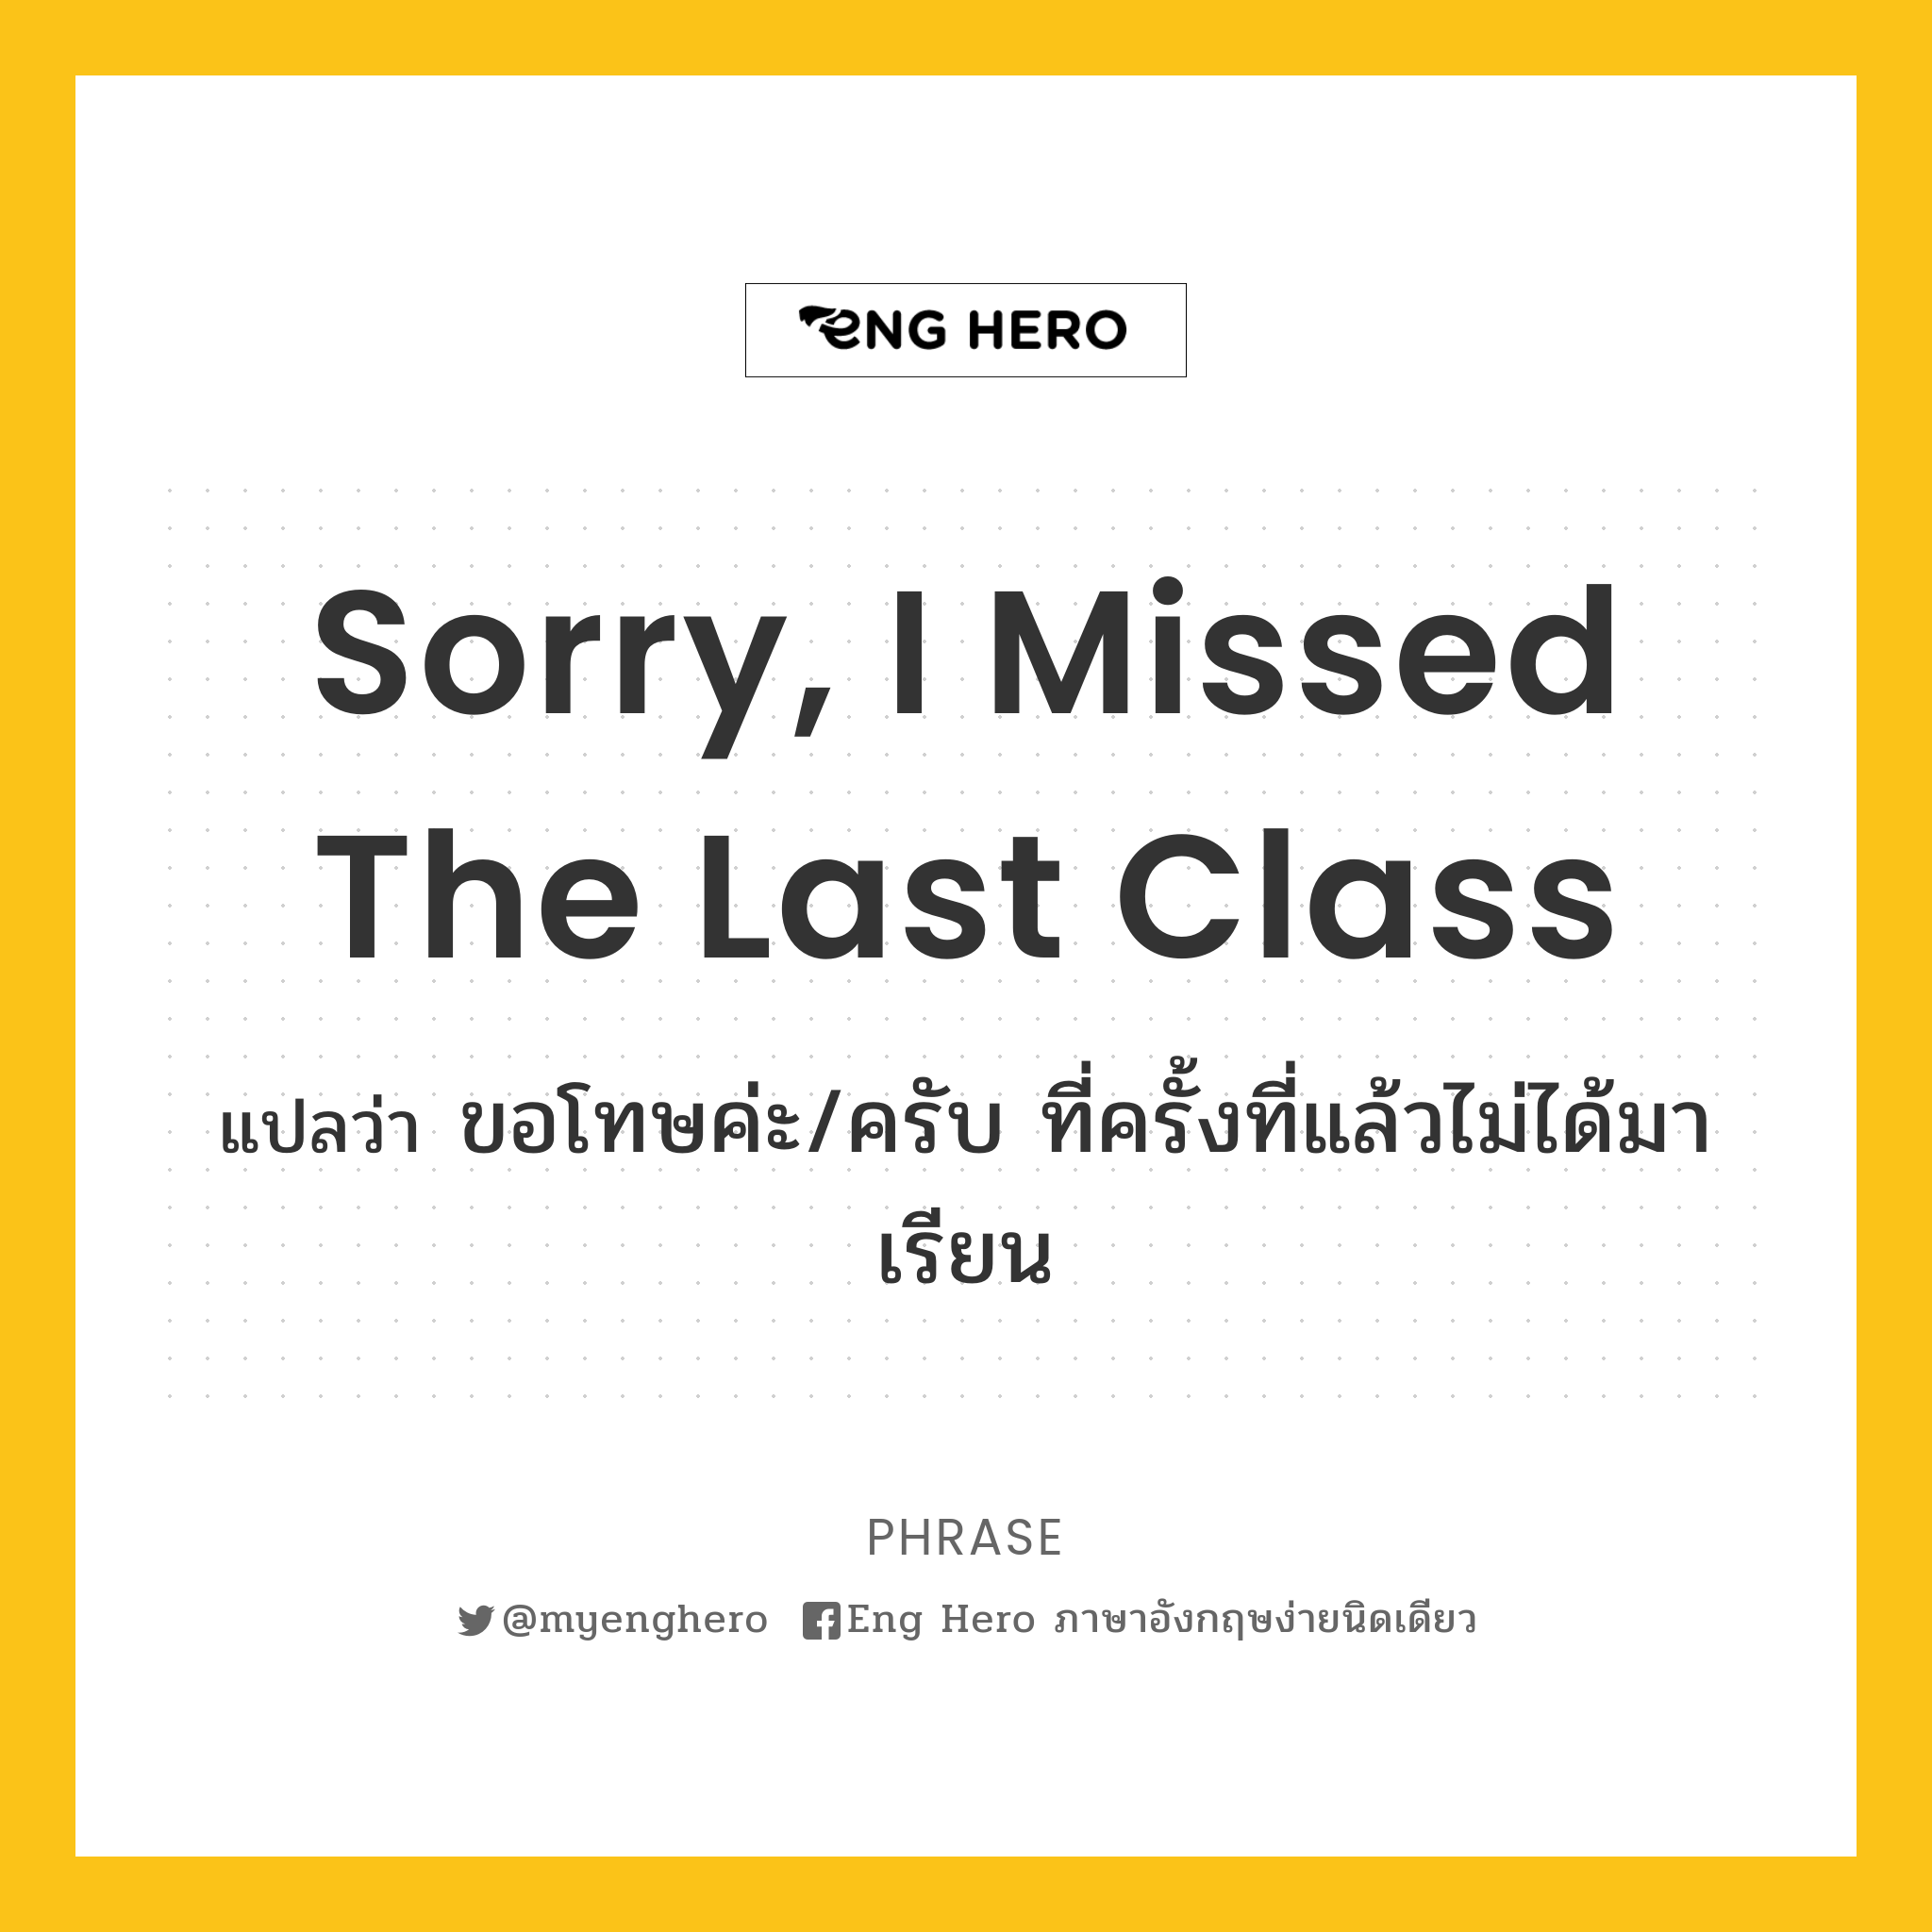 Sorry, I missed the last class